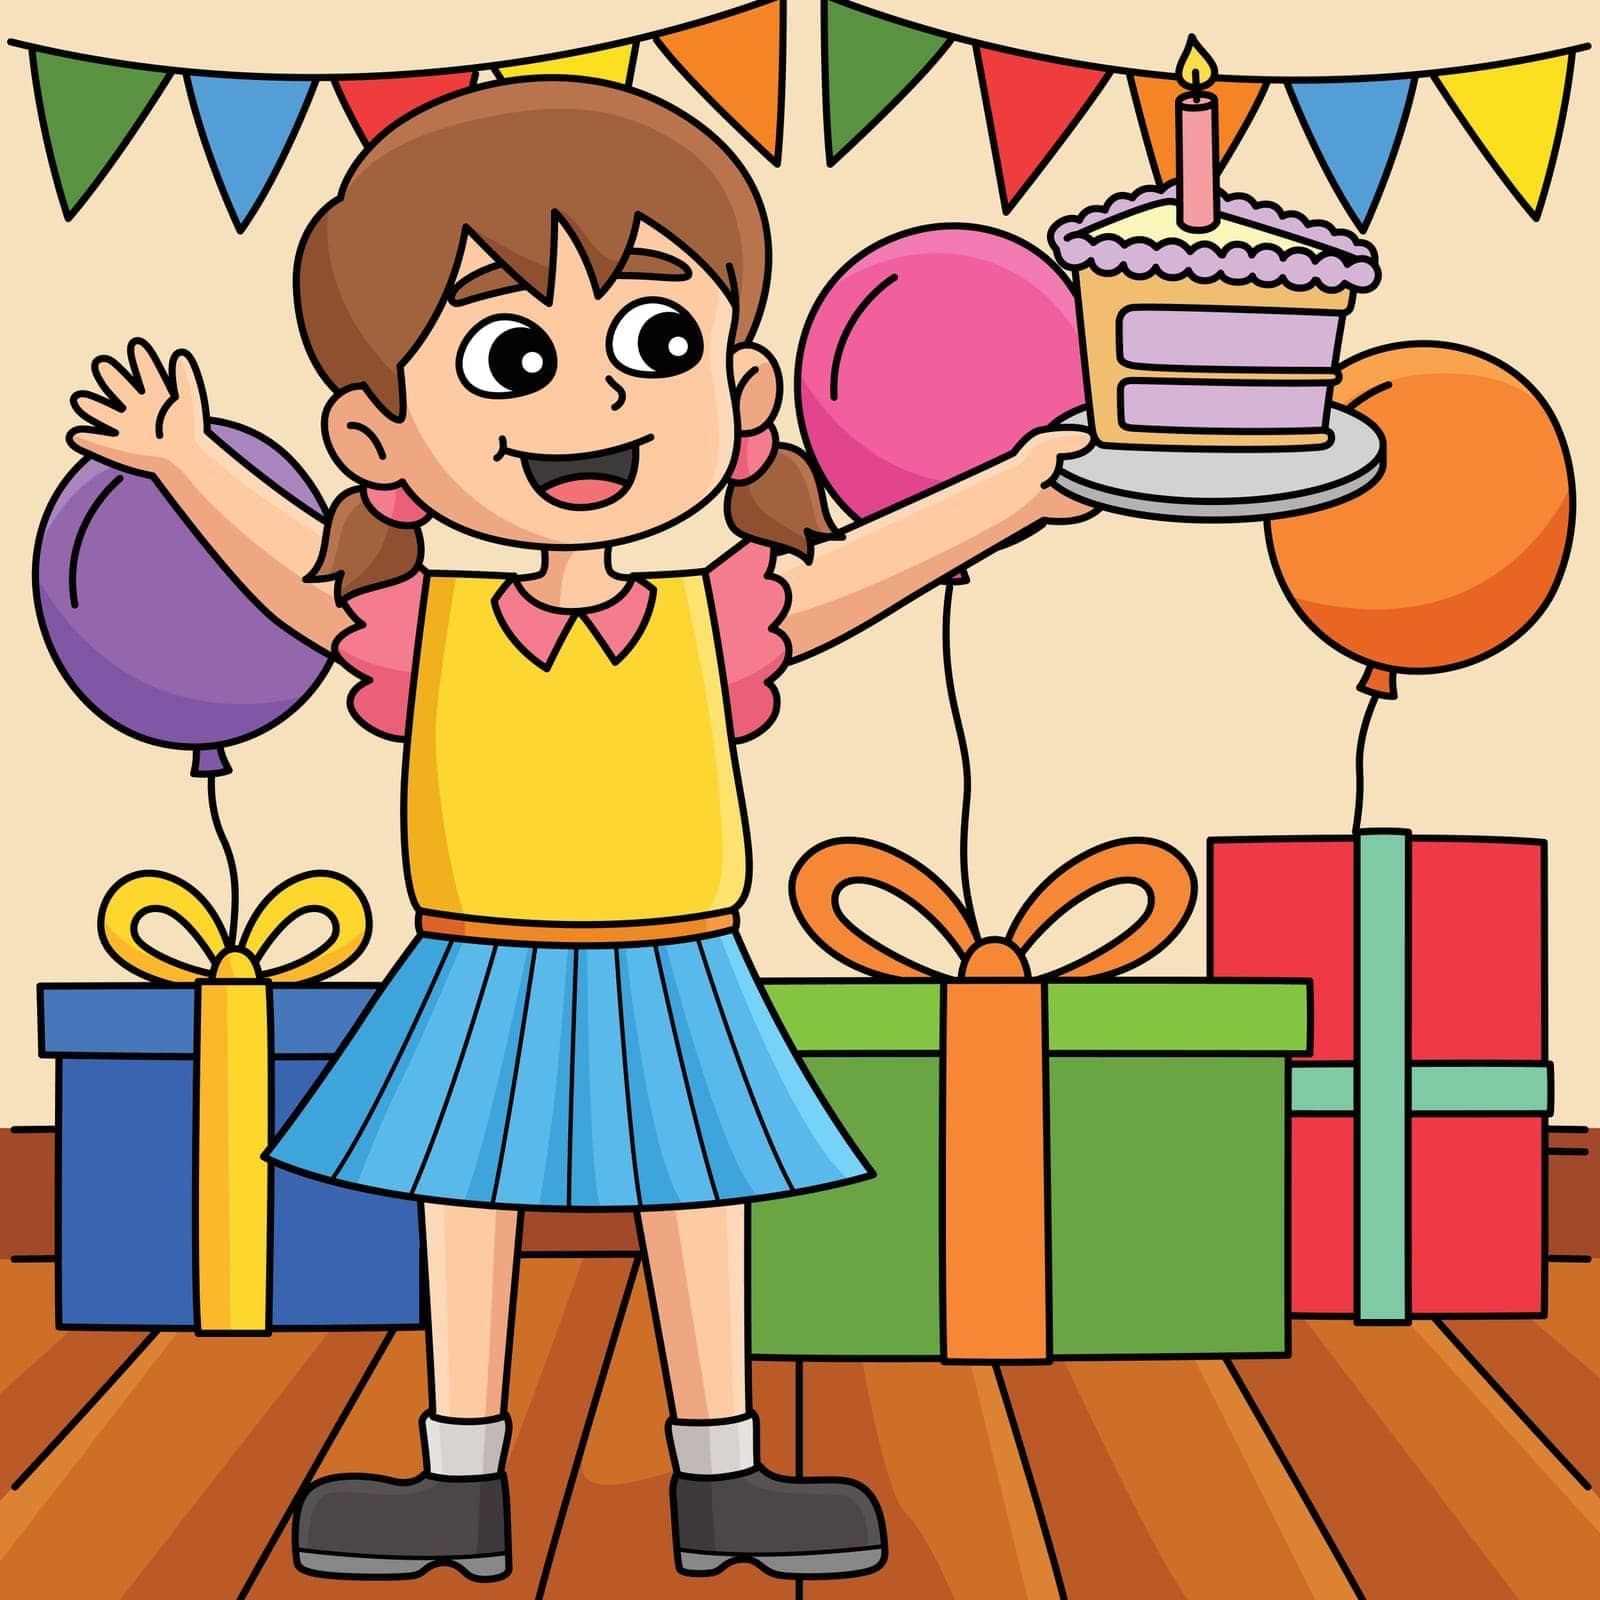 This cartoon clipart shows a Girl Holding a Happy Birthday Cake illustration.